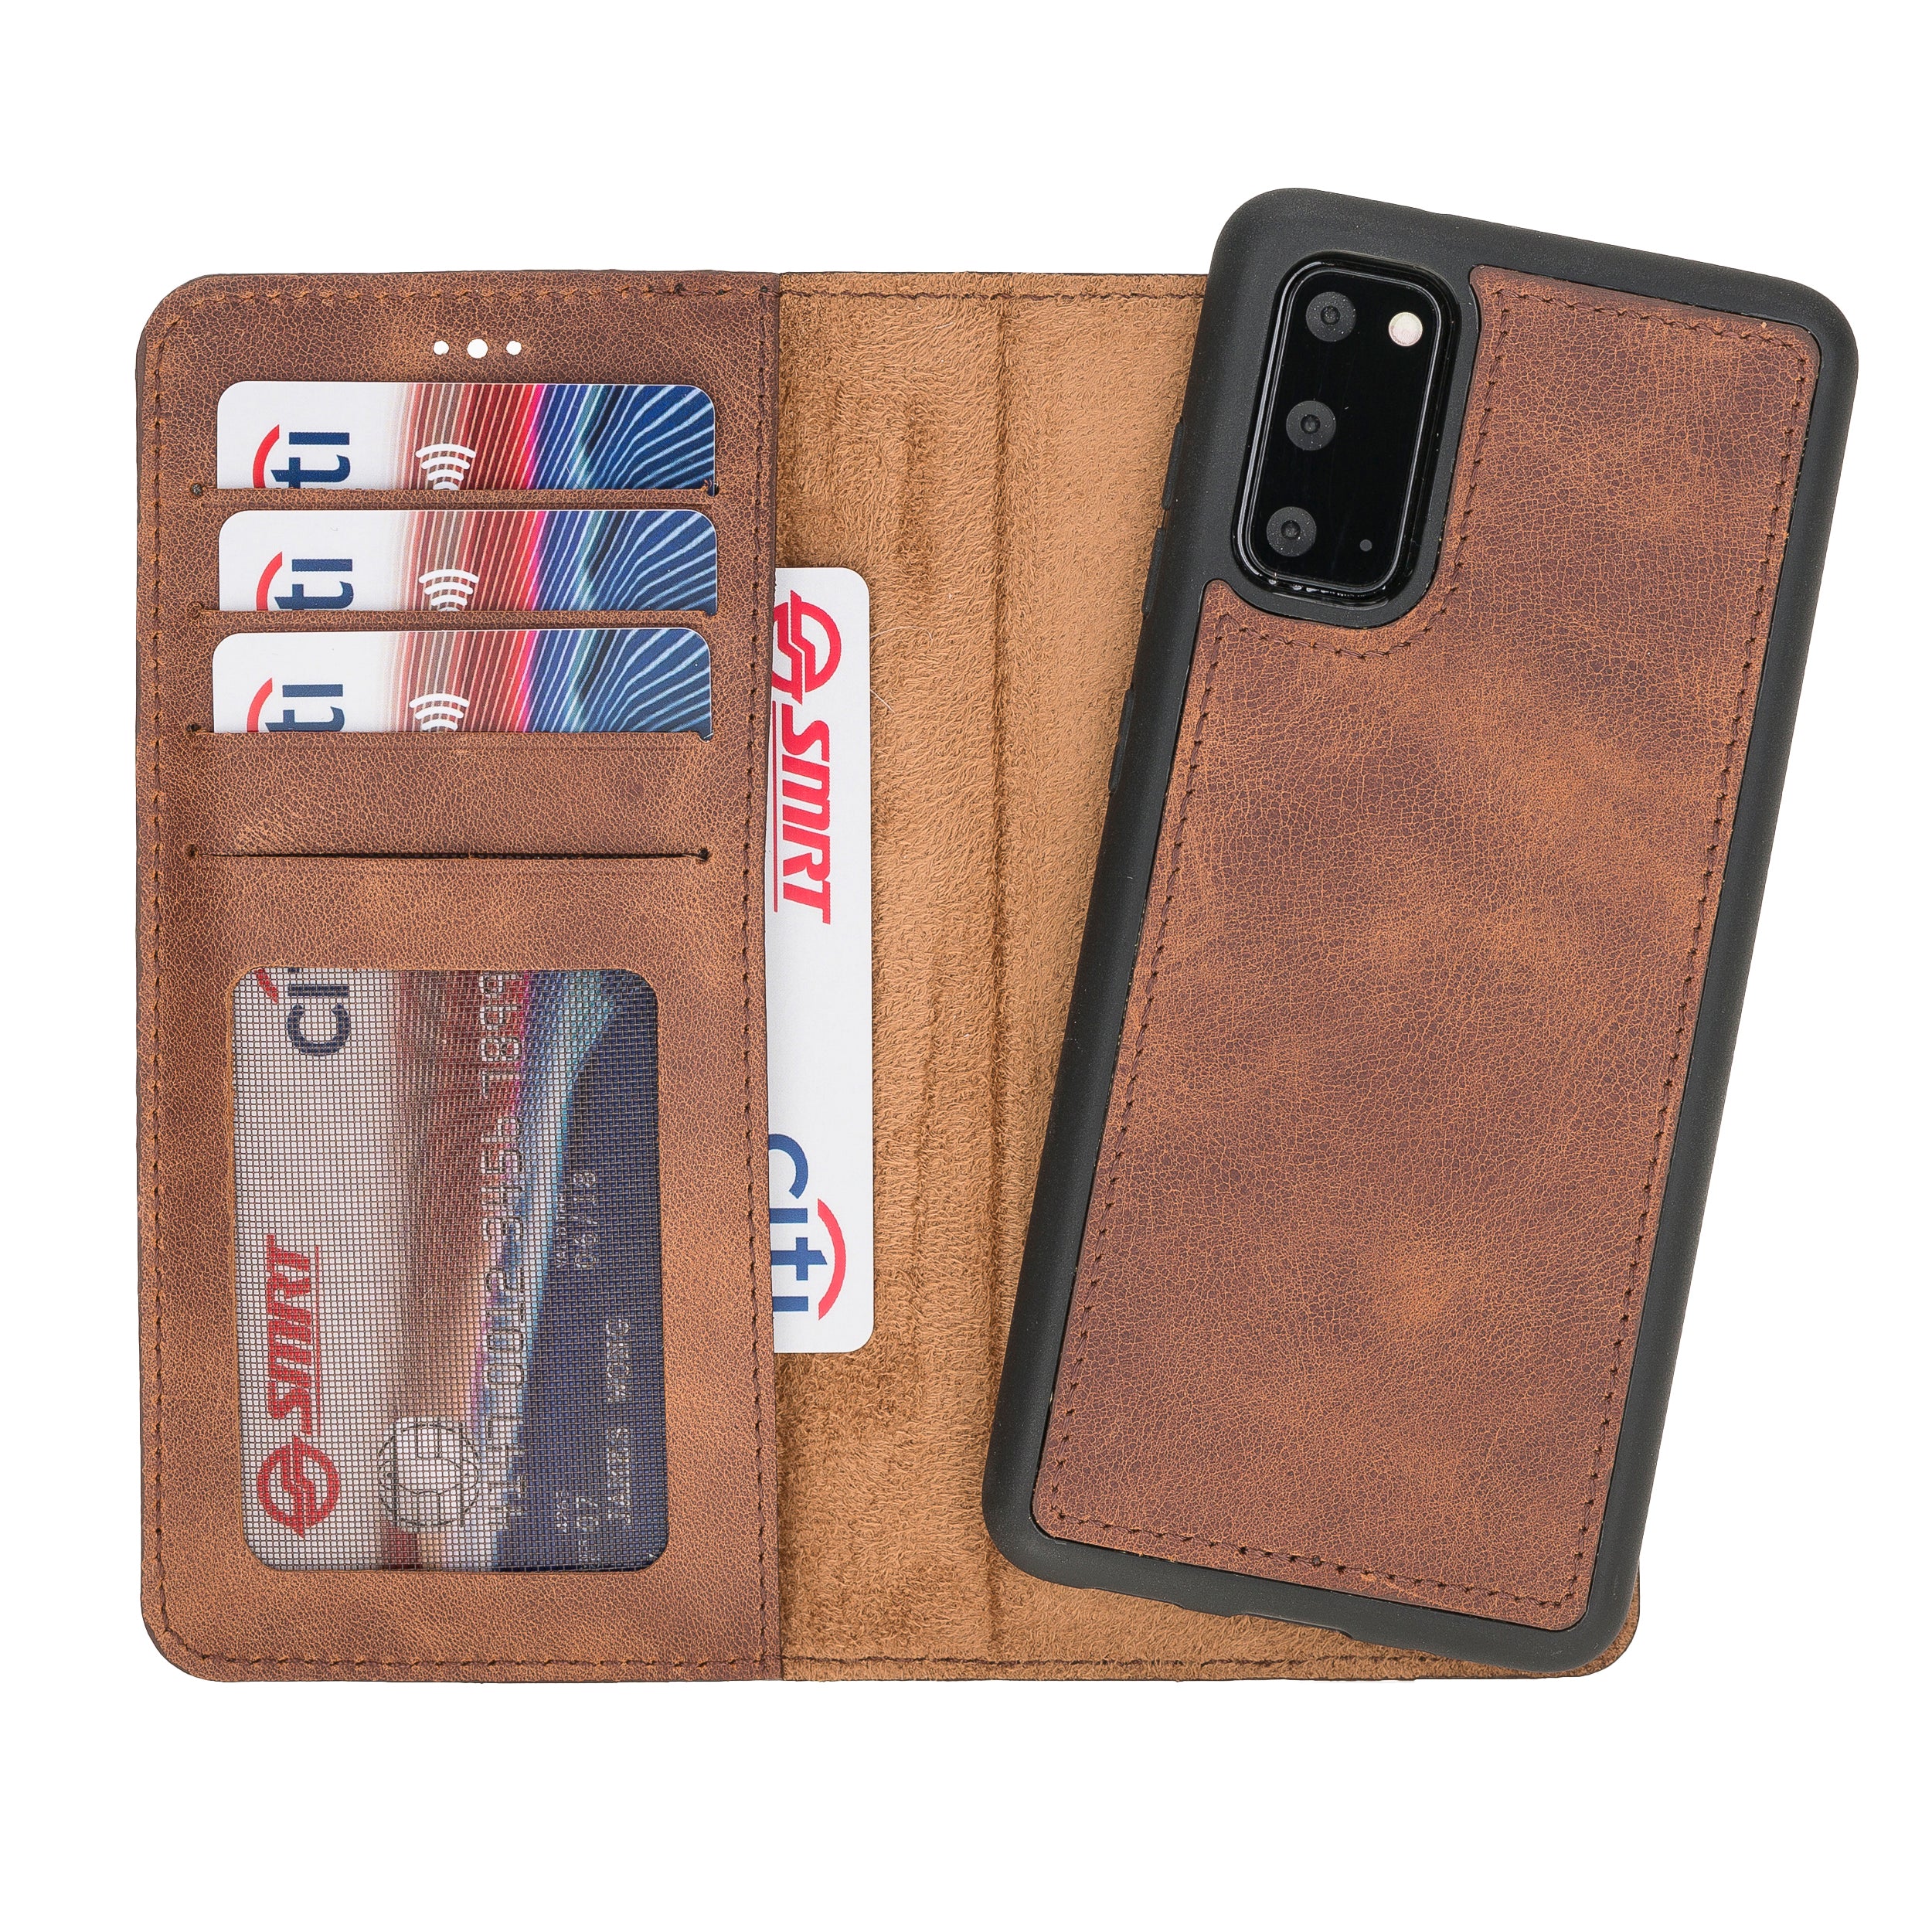 Galaxy S20 Leather Wallet Case with Card Holder - Hardiston